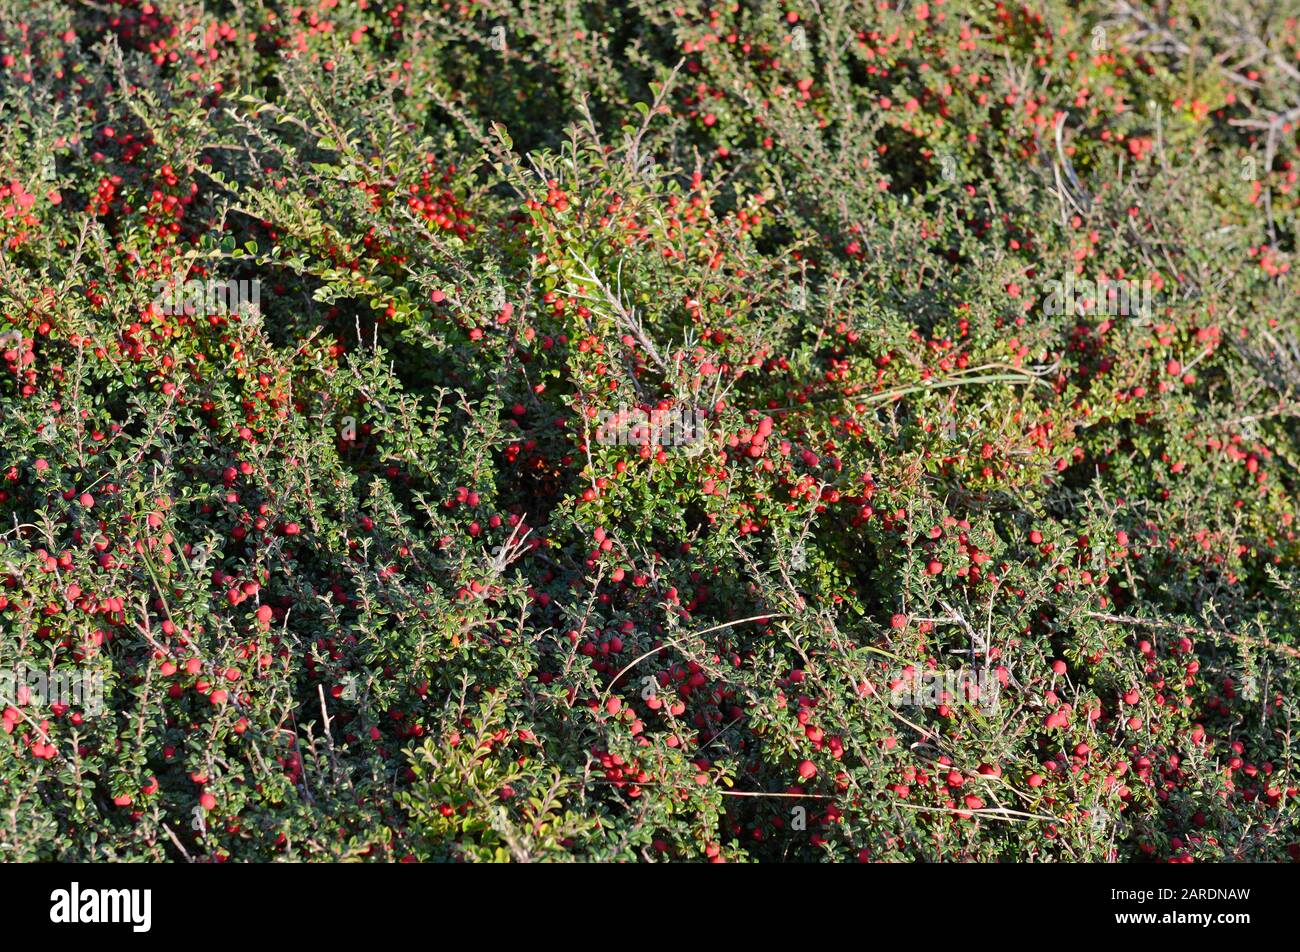 Cotoneaster shrub with many red berries in the vegetation above Langland bay on the Gower peninsula near Swansea in Wales, UK Stock Photo